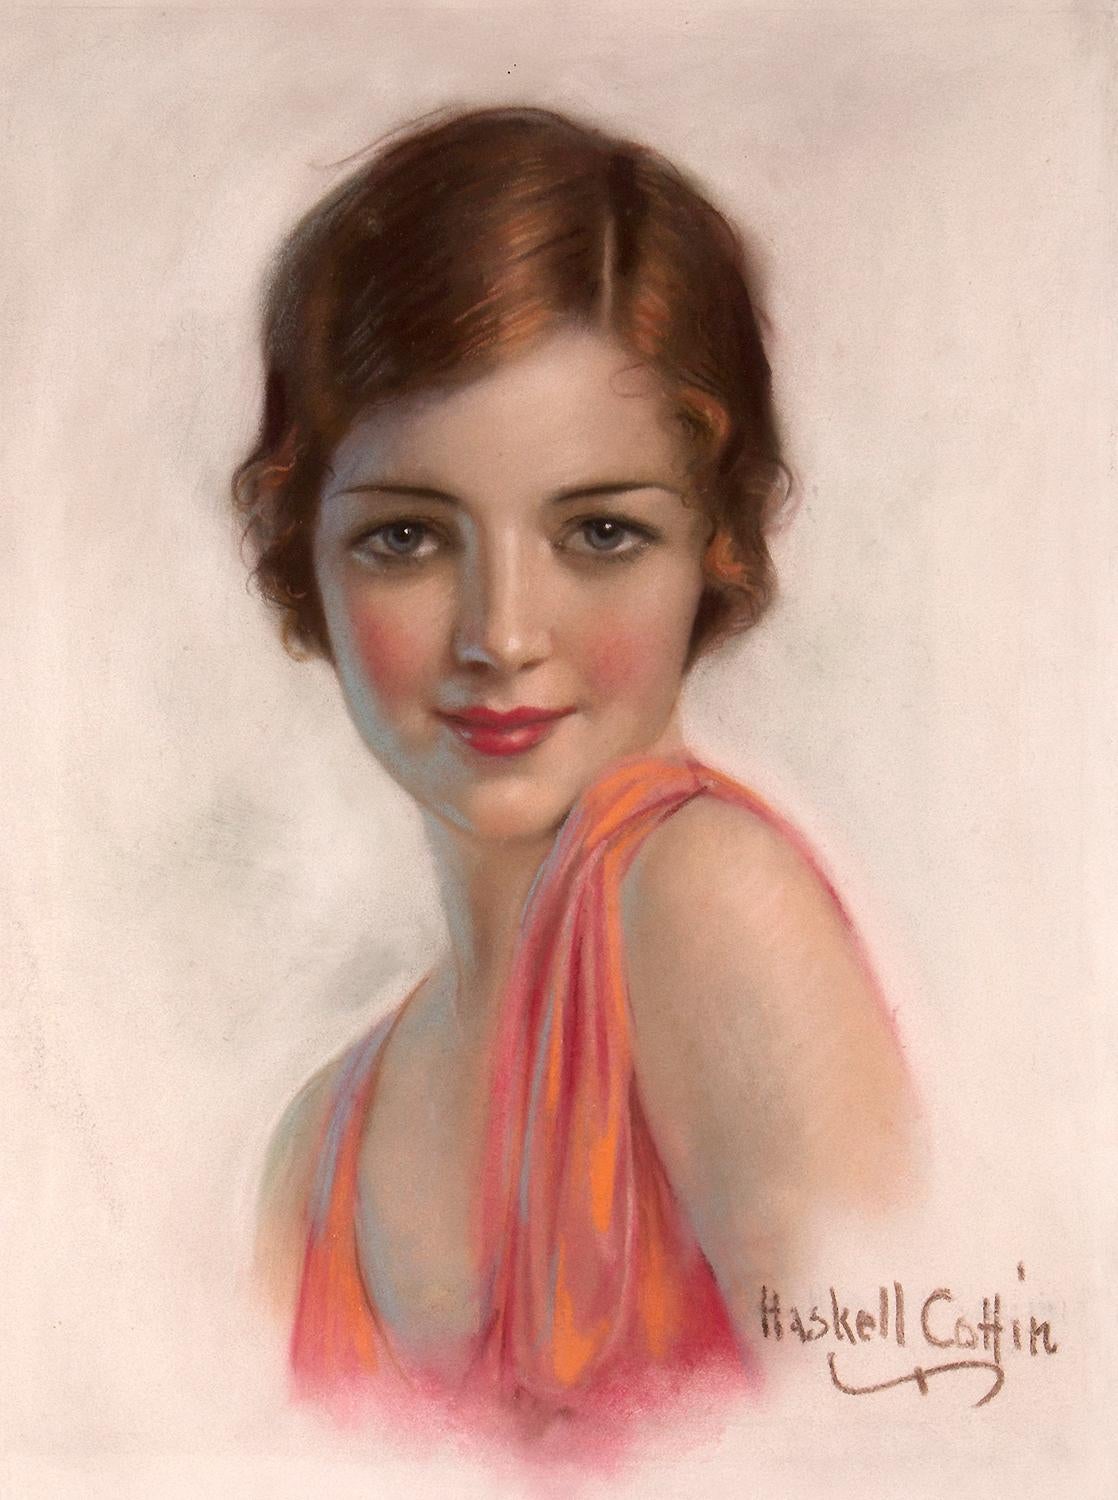 William Haskell Coffin Portrait Painting - Sweetheart of Sigma Chi